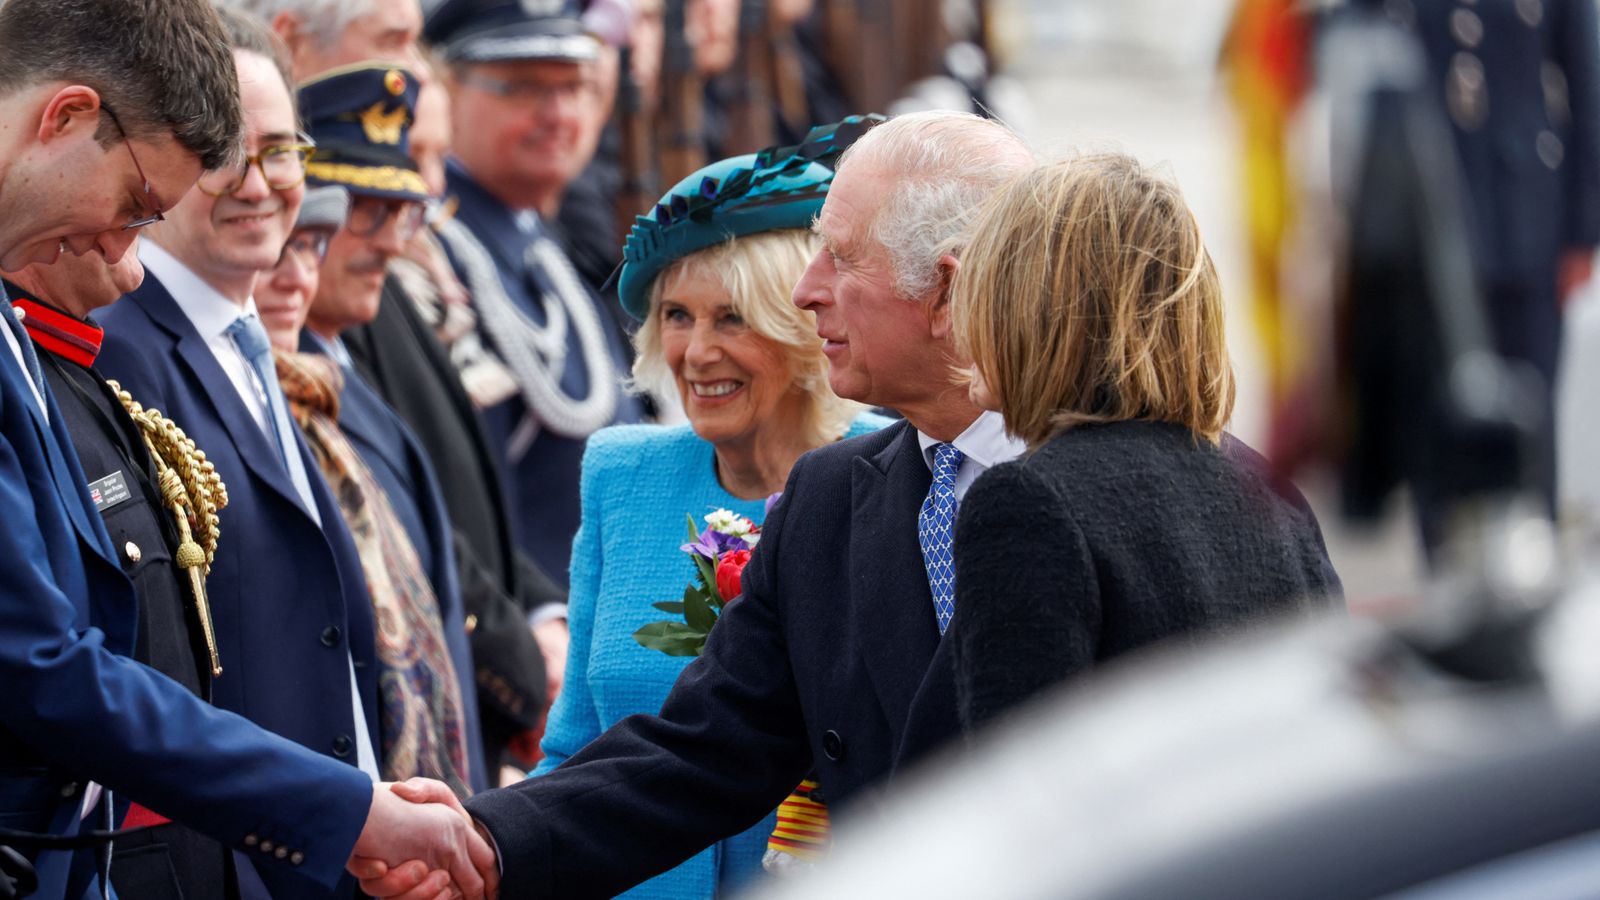 King and Queen Consort arrive in Berlin for first state visit